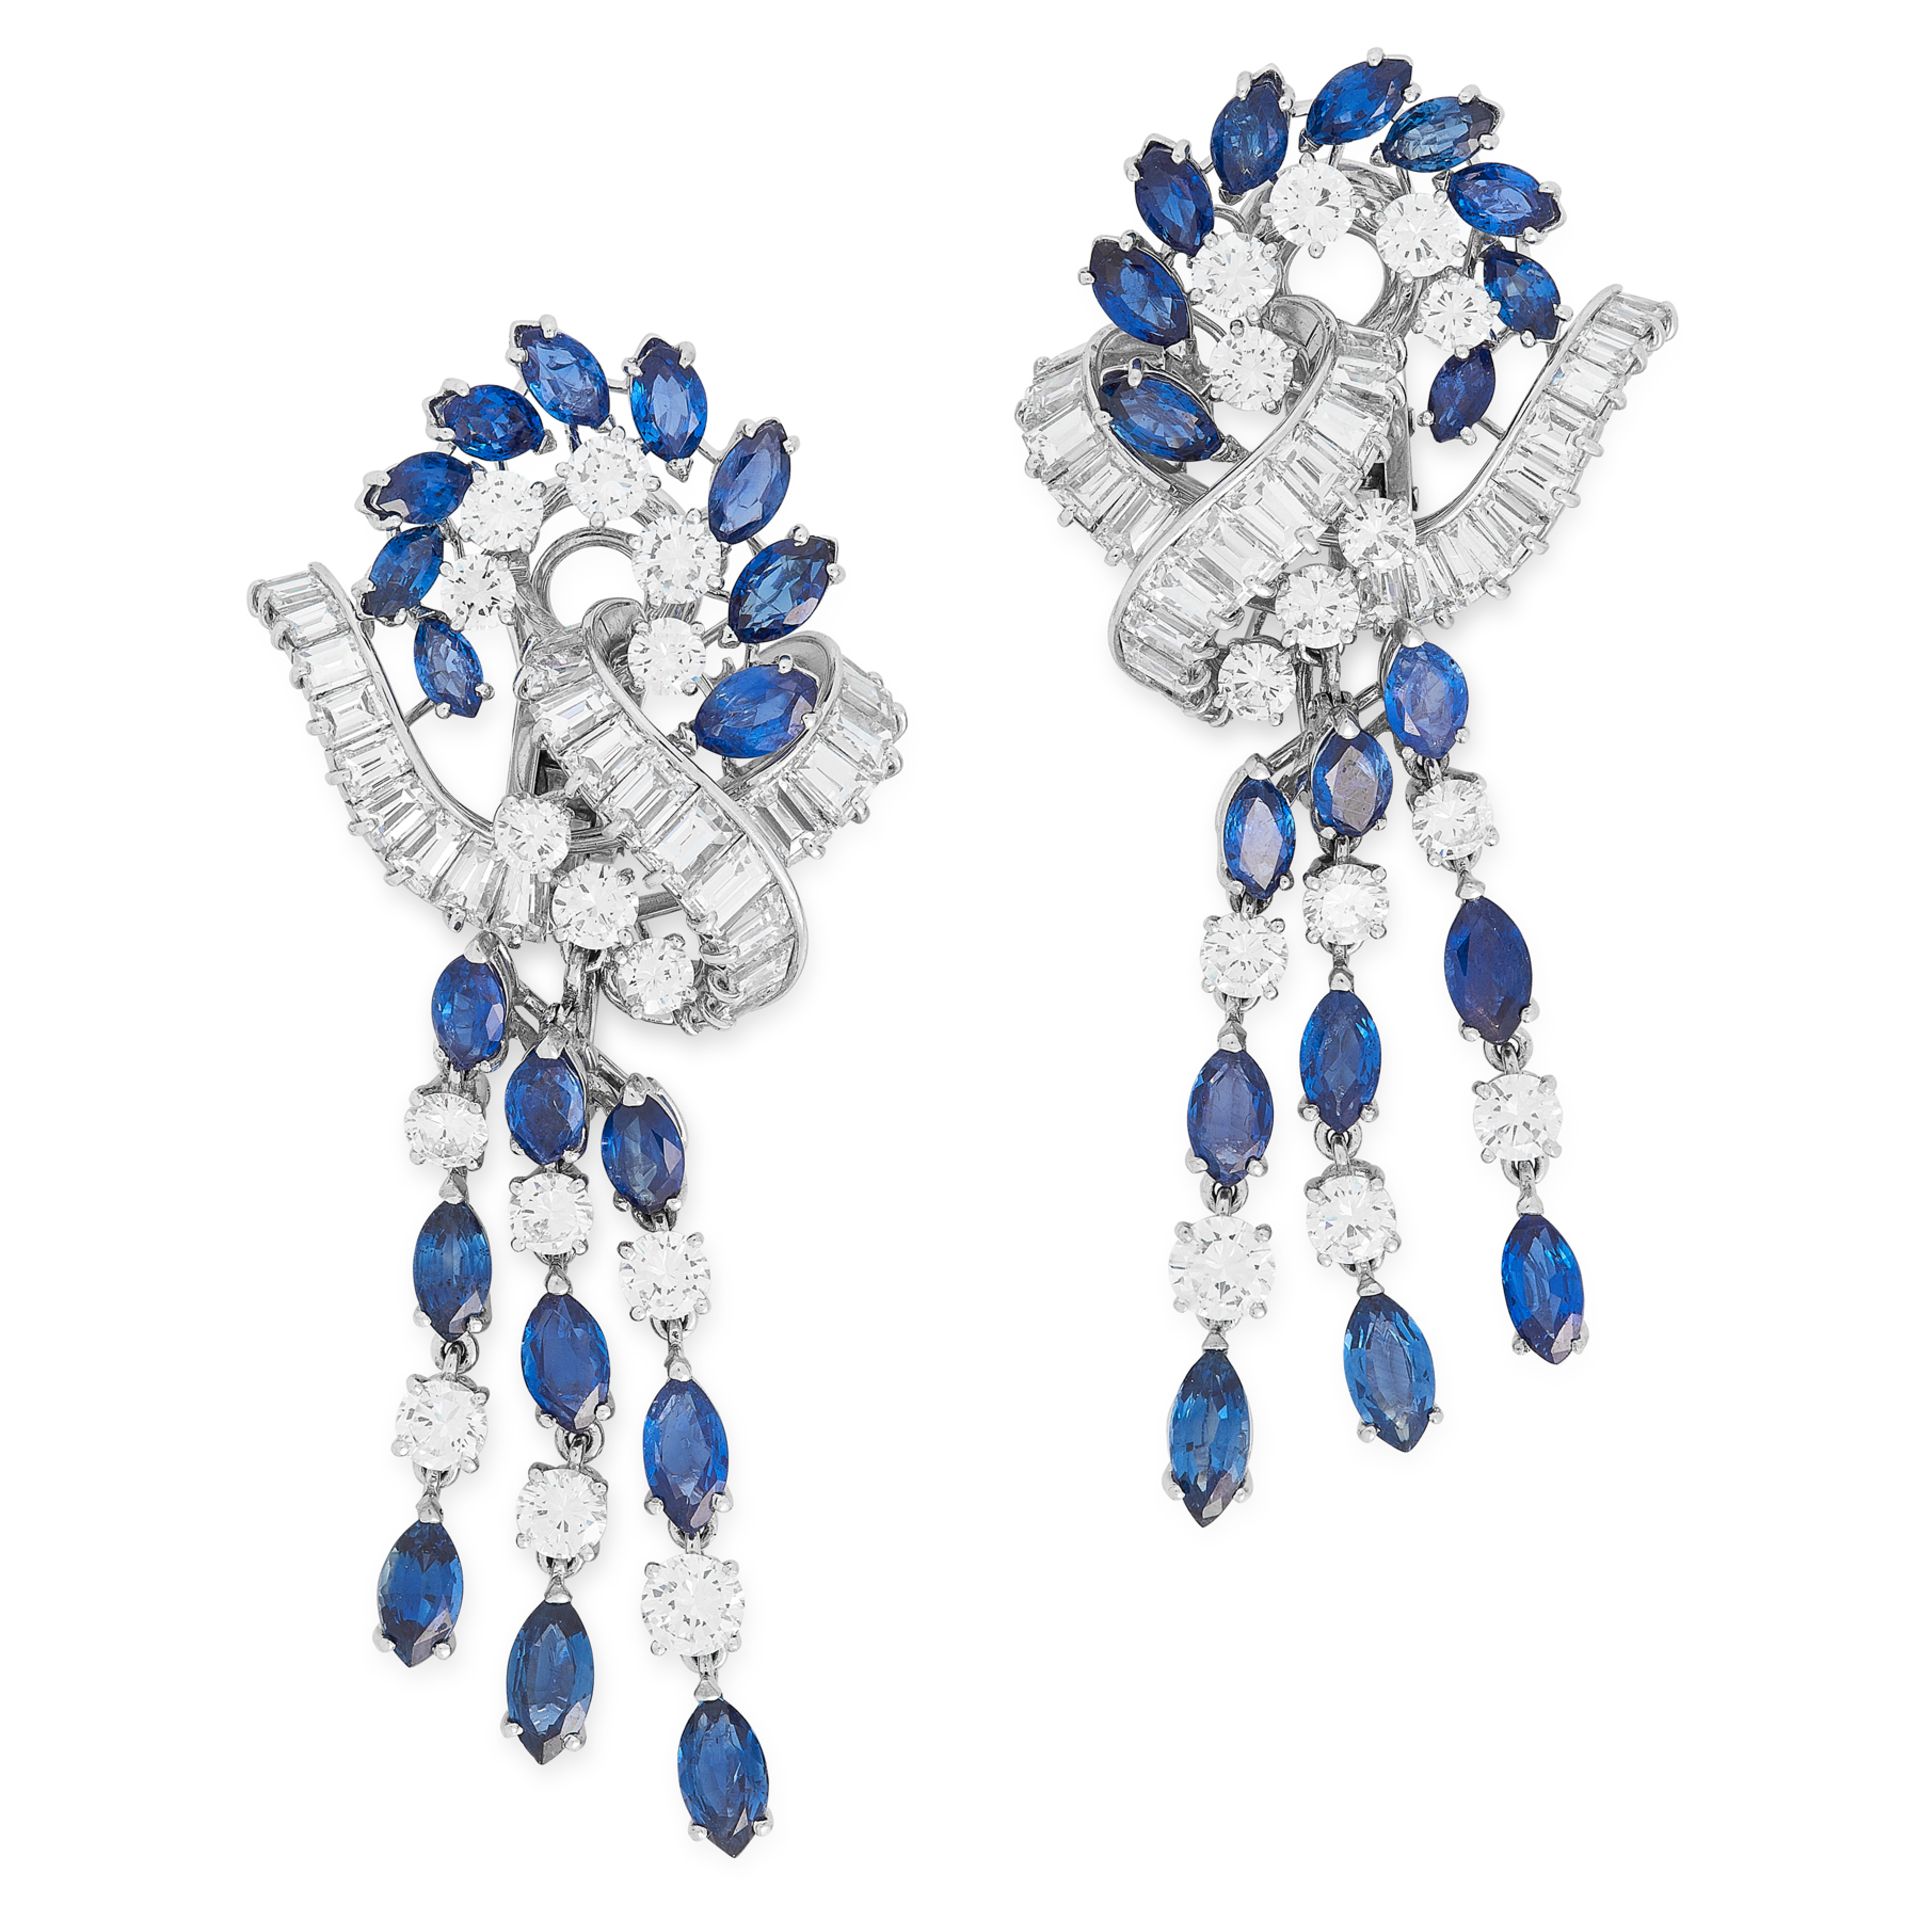 A PAIR OF SAPPHIRE AND DIAMOND PENDANT CLIP EARRINGS in 18ct white gold and platinum, each